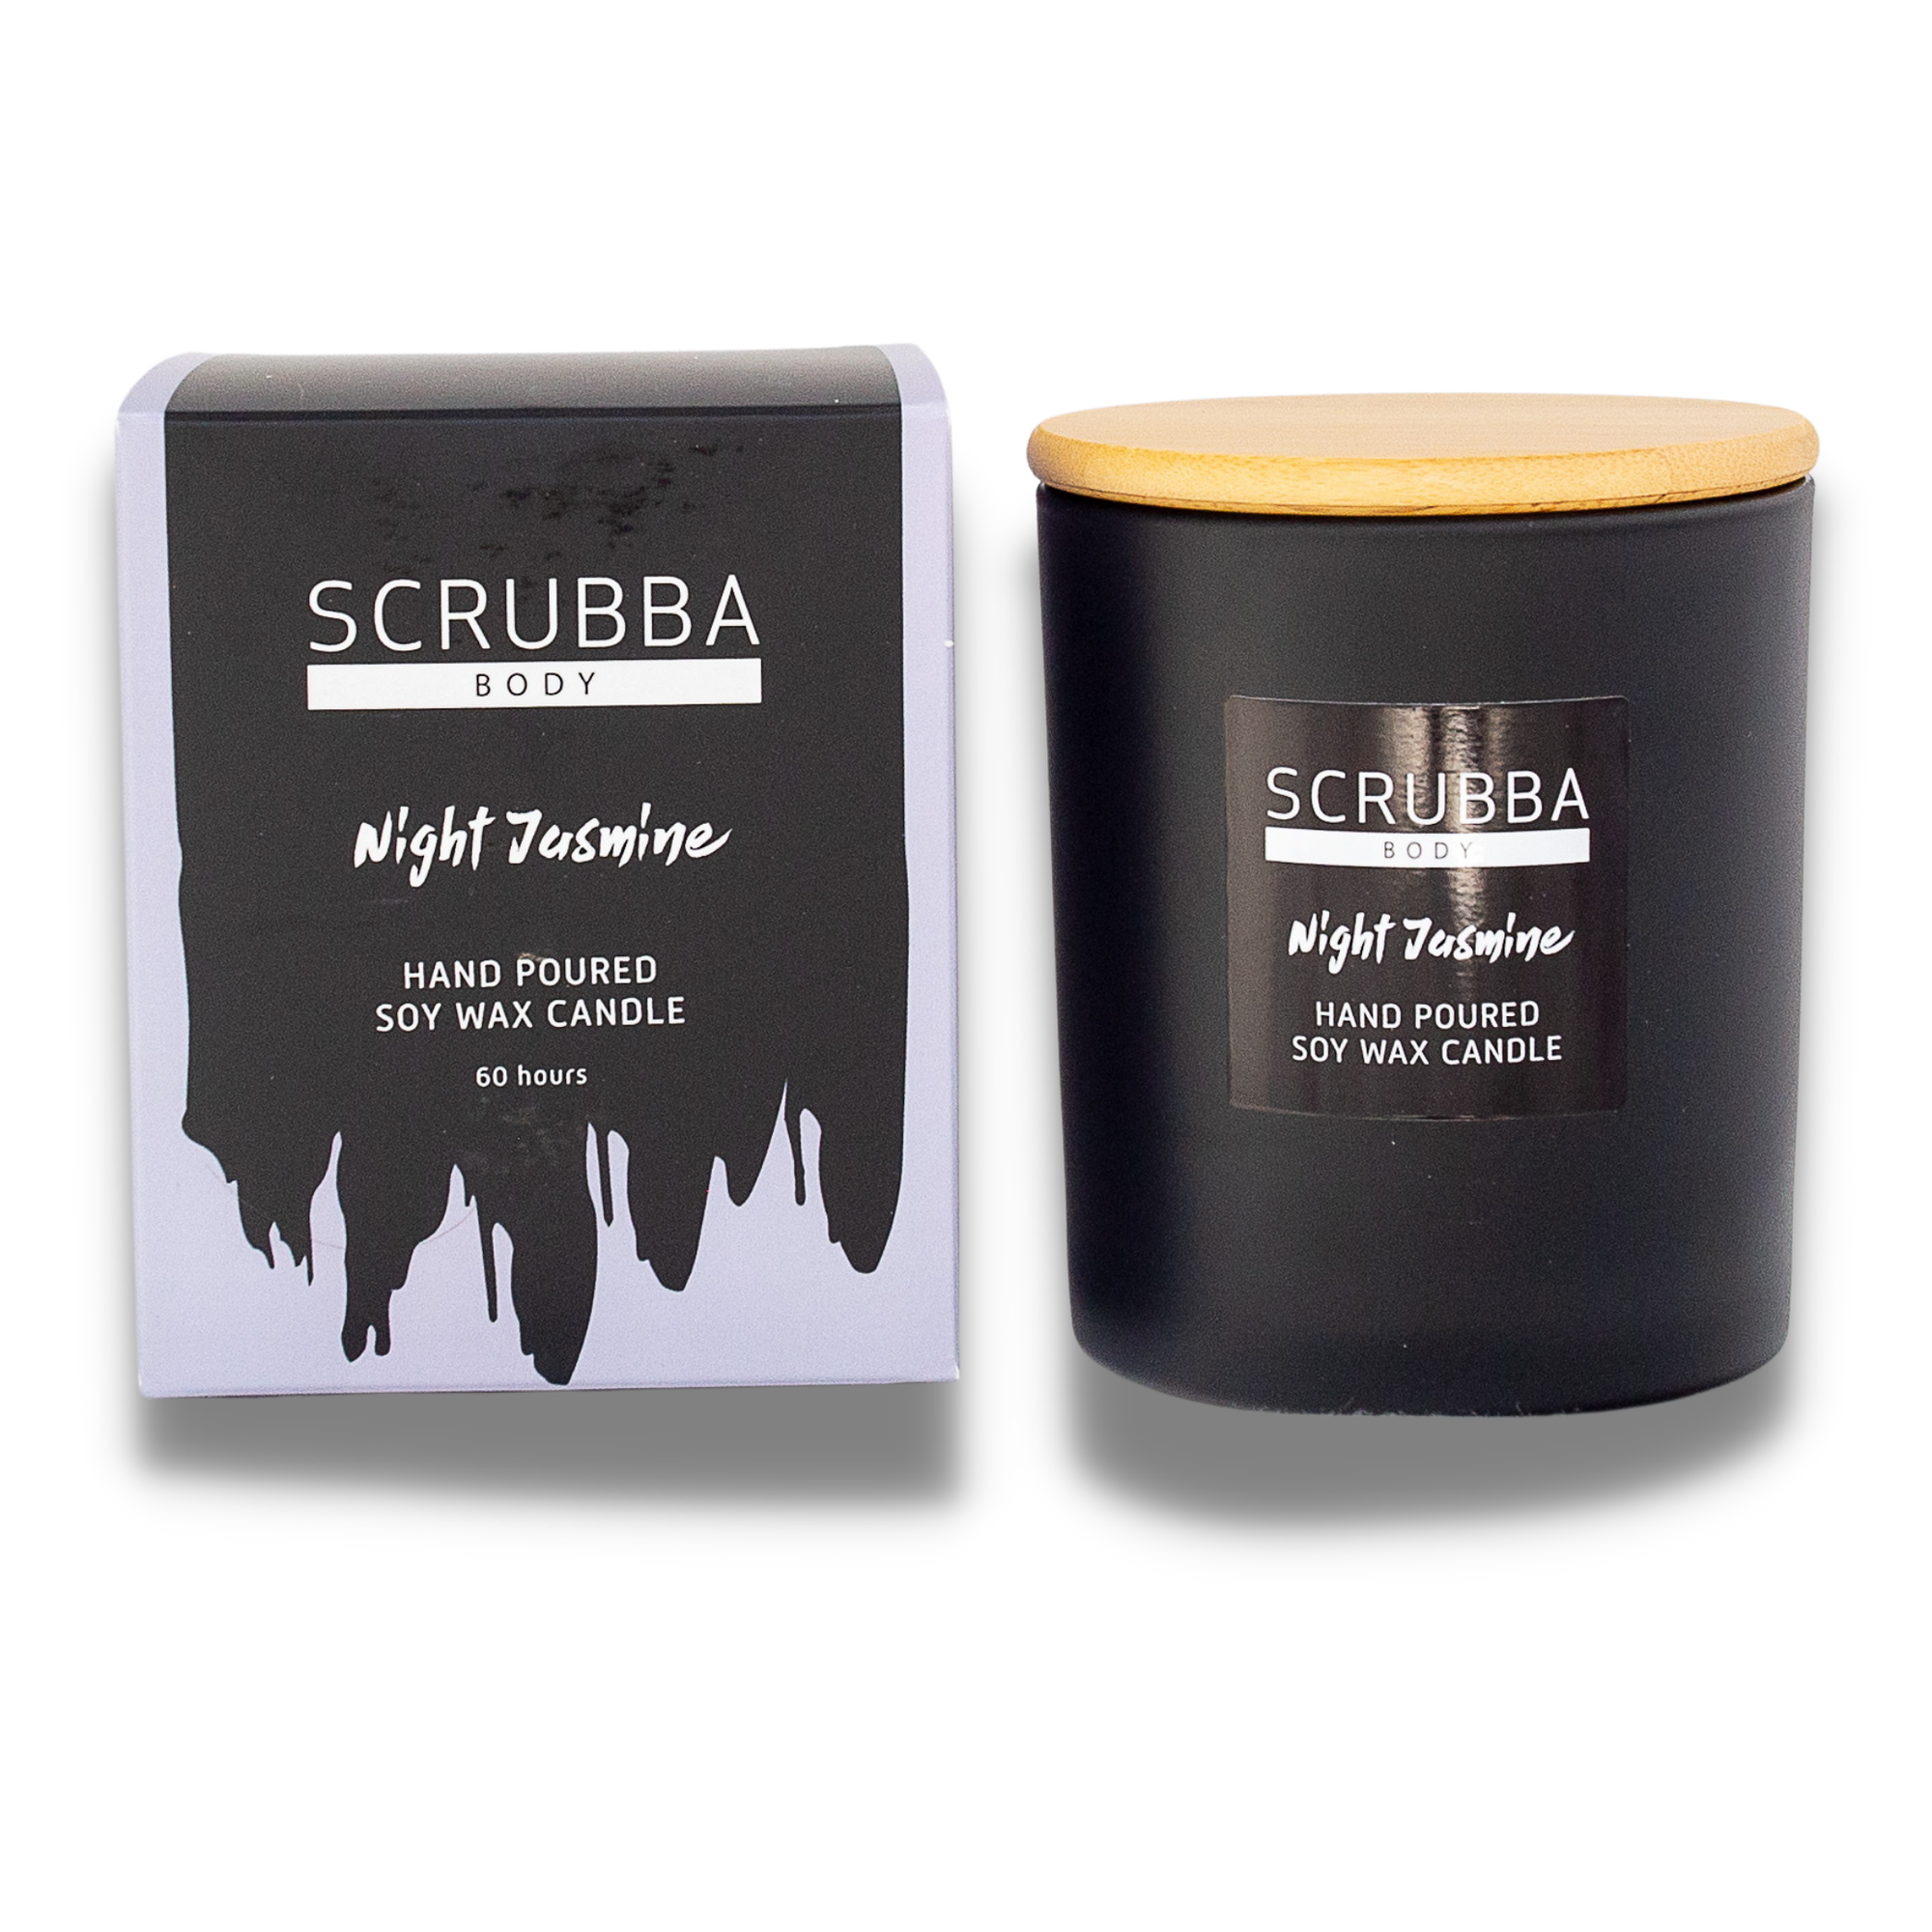 Scrubba Body Candle Night Jasmine Natural Soy Candle